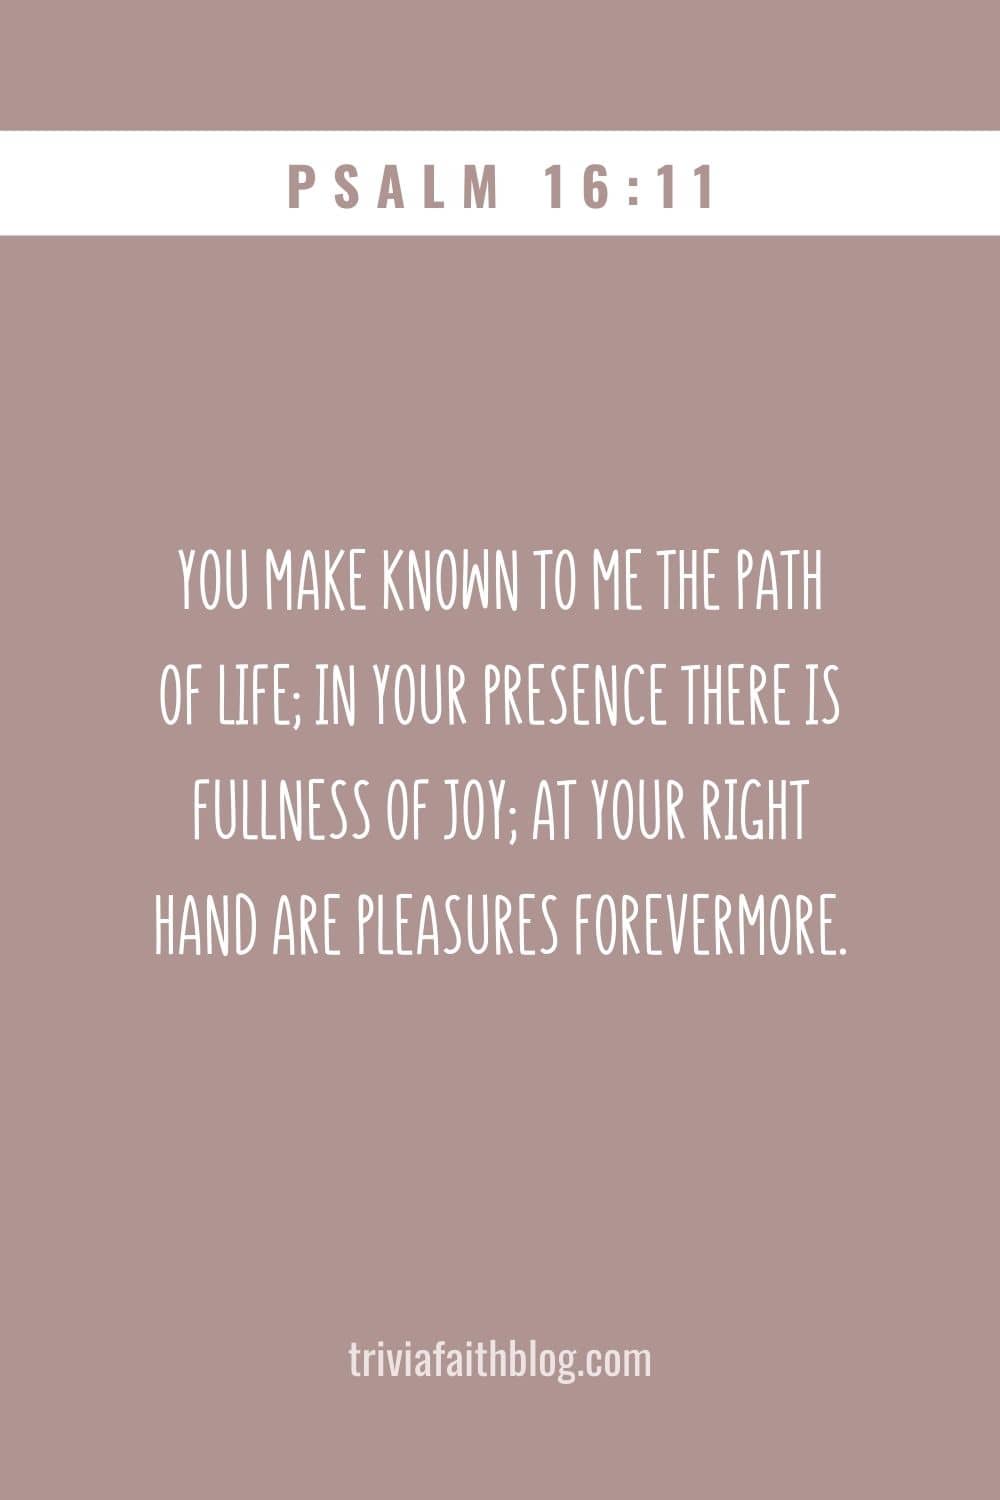 You make known to me the path of life; in your presence there is fullness of joy; at your right hand are pleasures forevermore